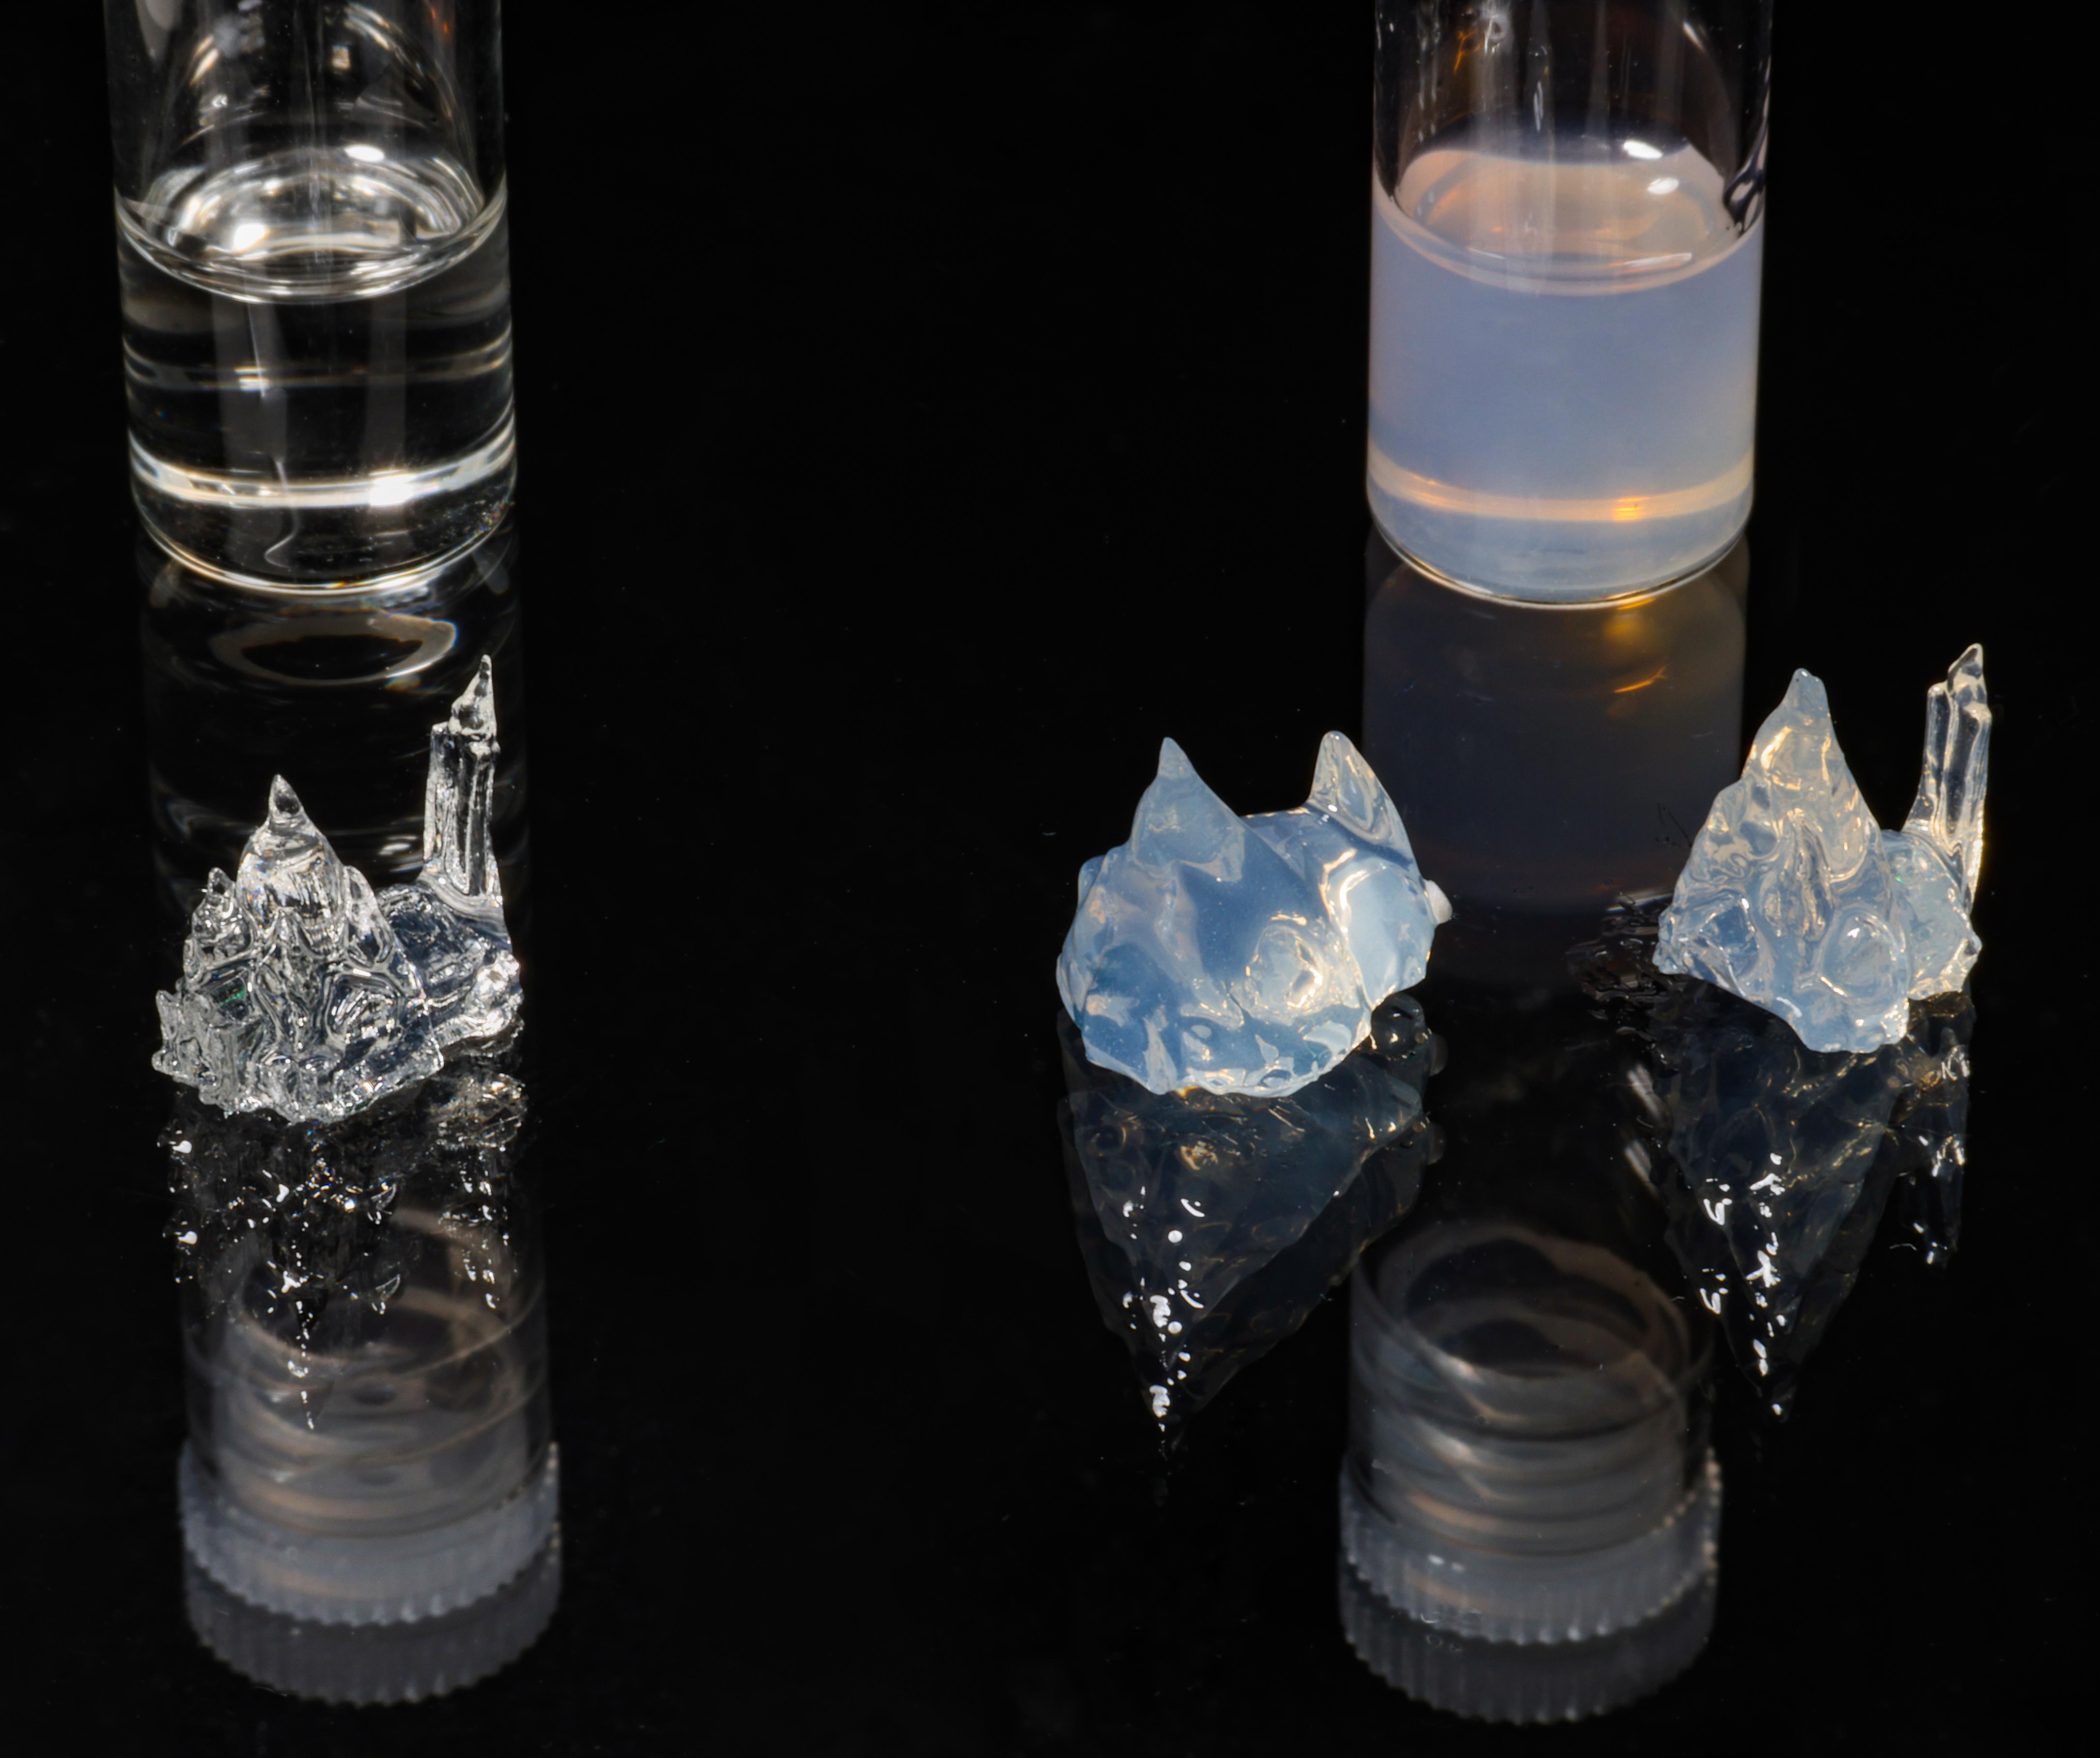 Three 3D-printed objects, one made from transparent resin (left); one from opaque resin